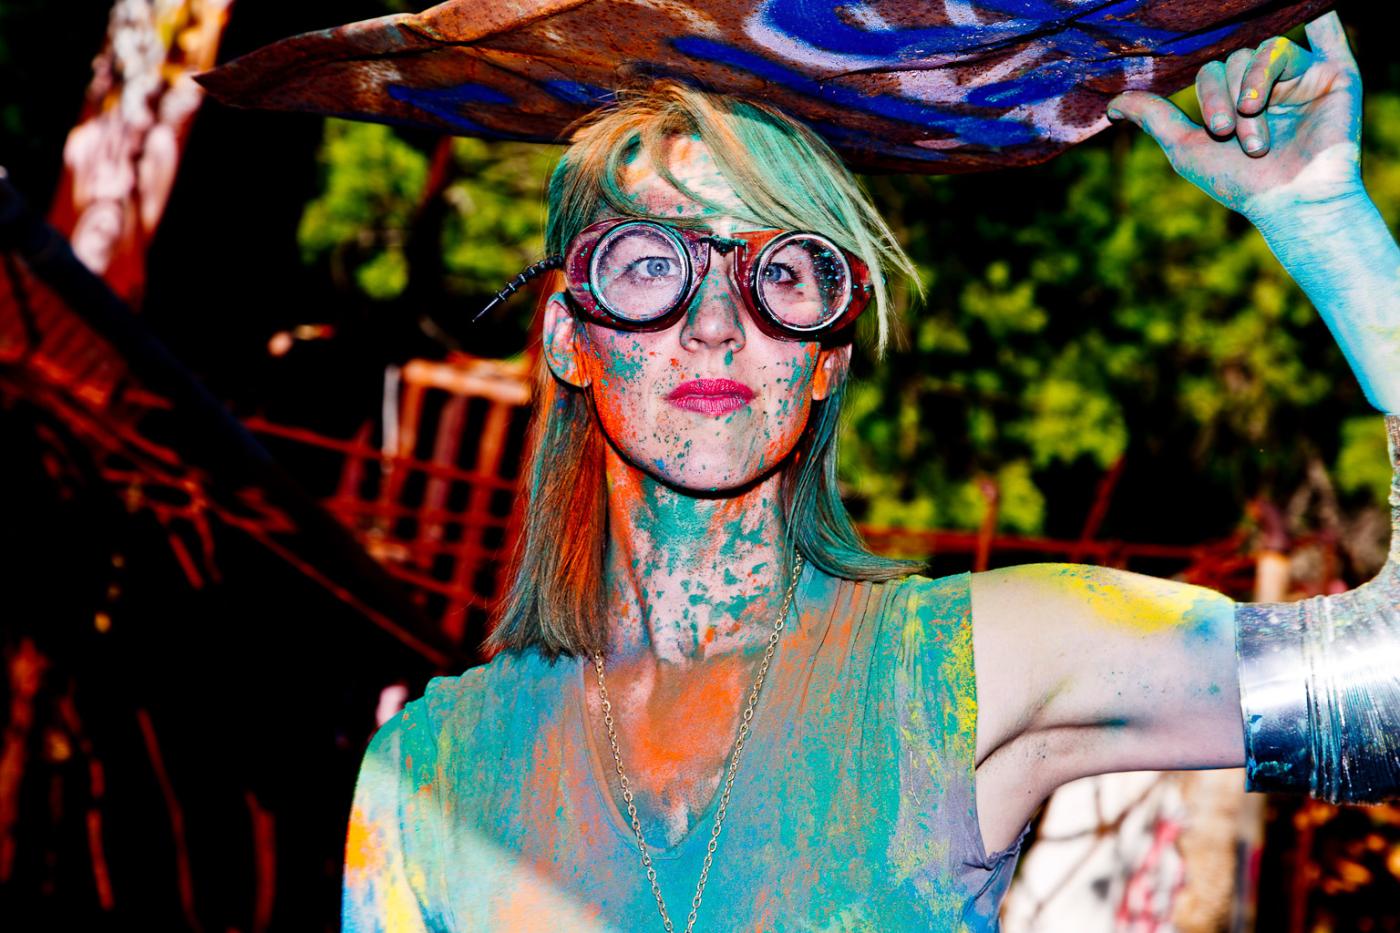 A woman wearing giant goggles is covered in colorful splattered paints